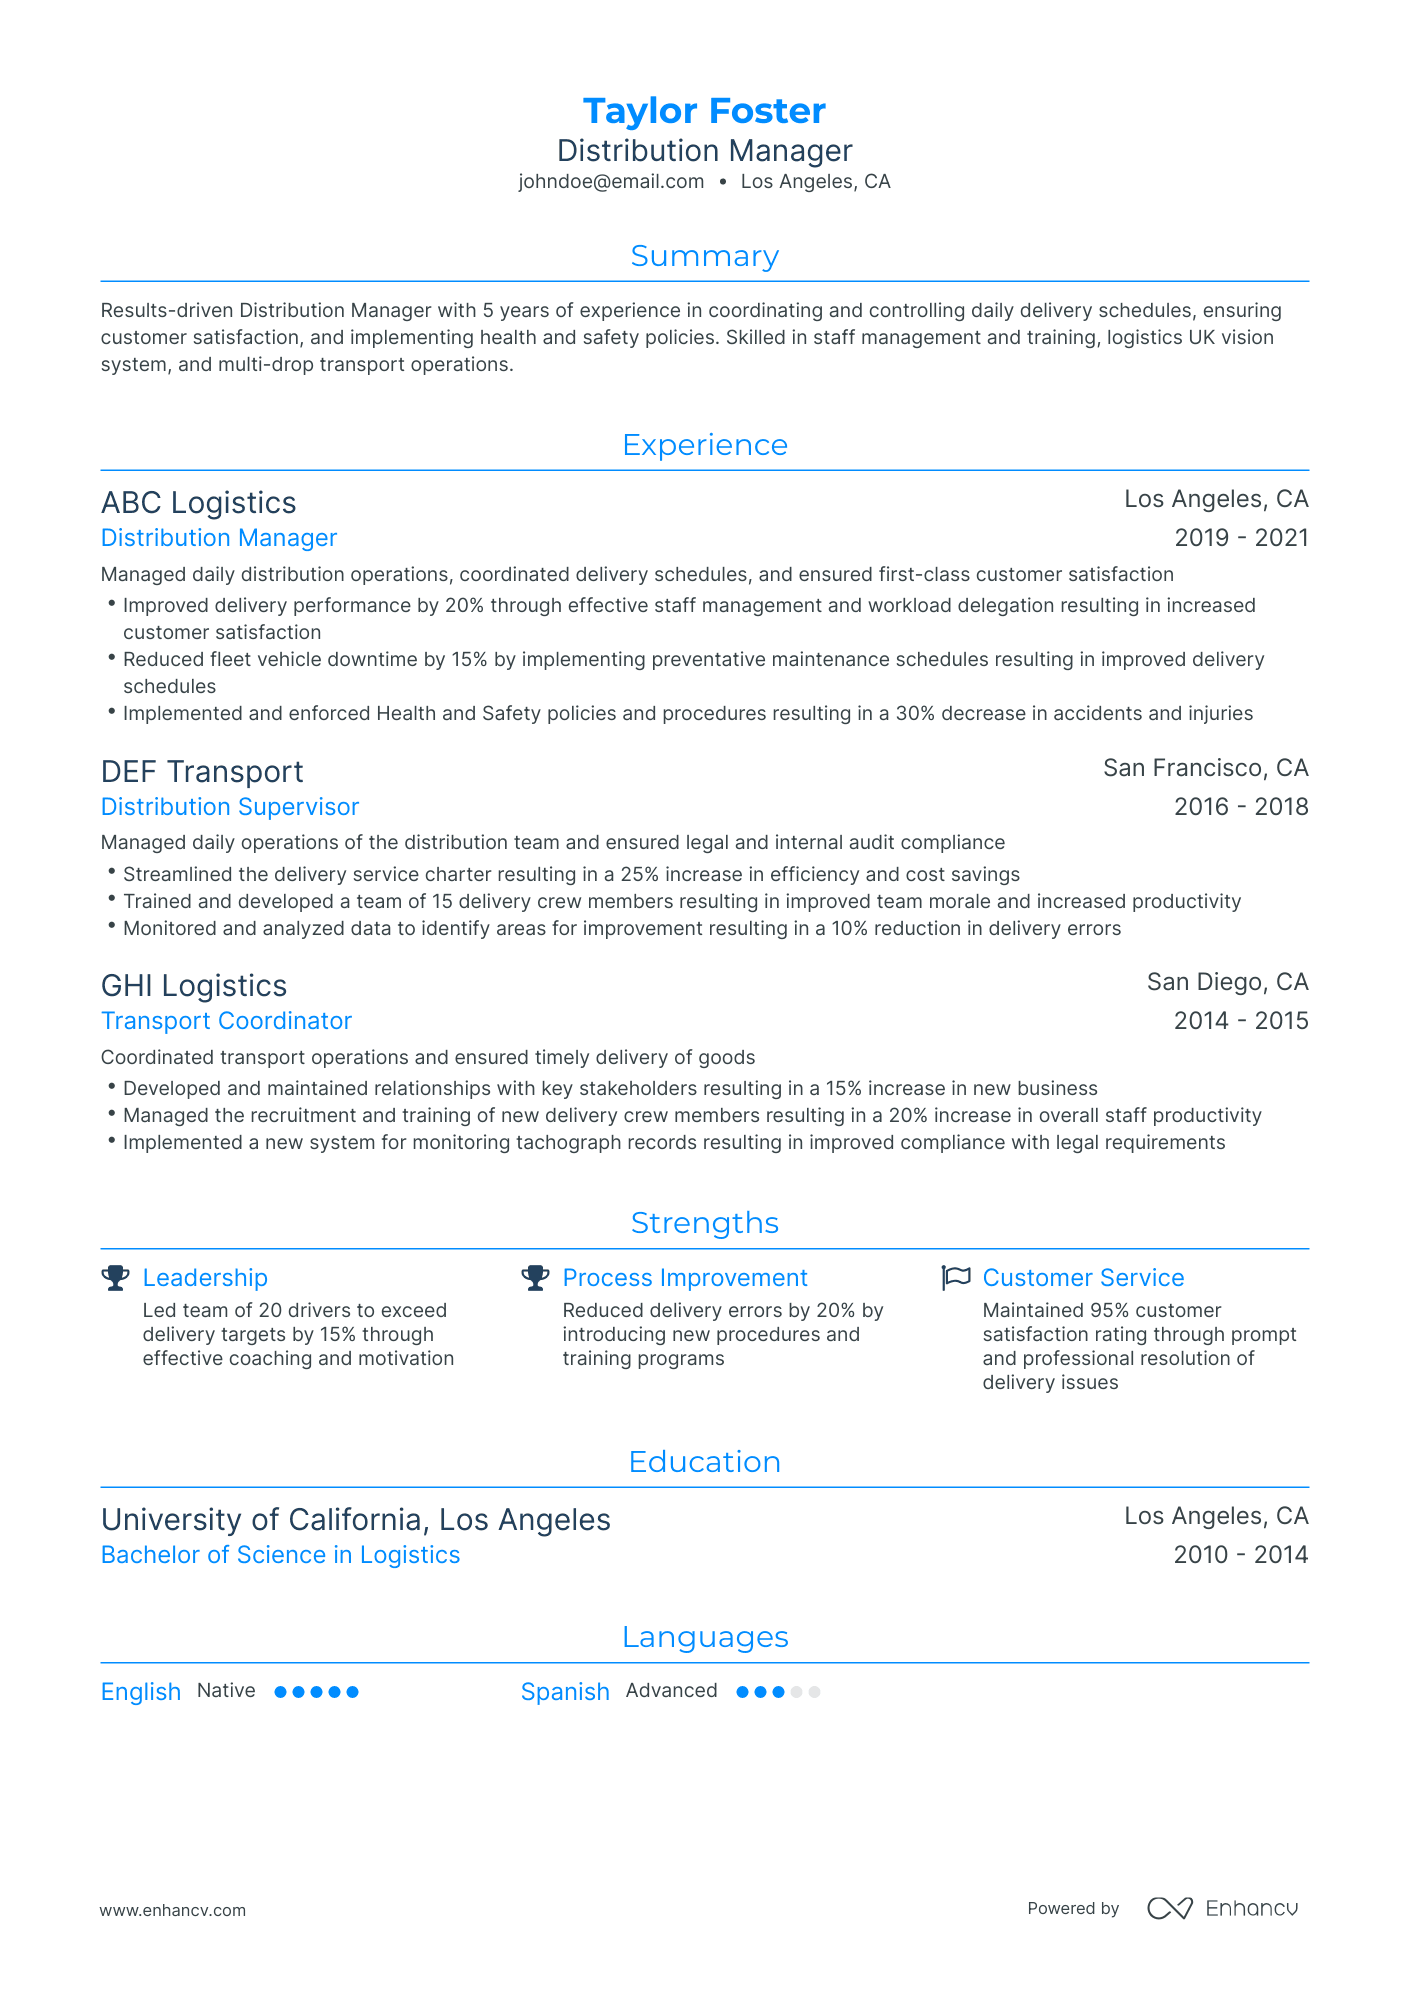 Traditional Distribution Manager Resume Template